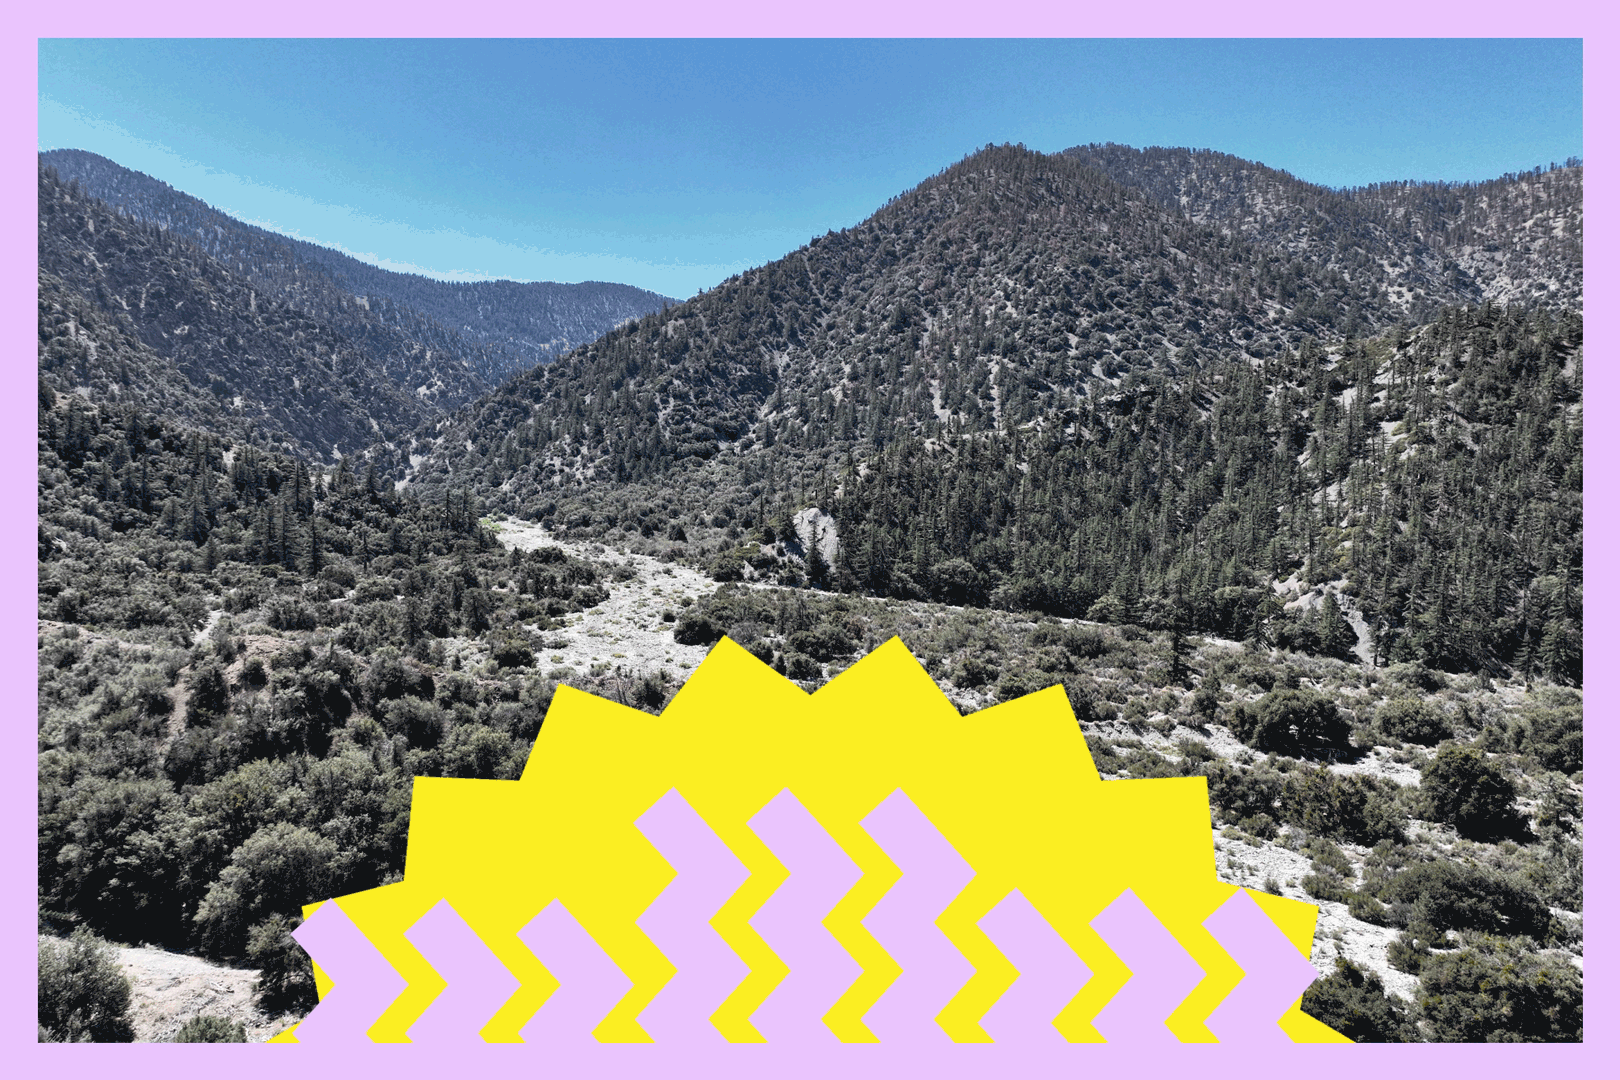 The remote and picturesque Angeles National Forest.